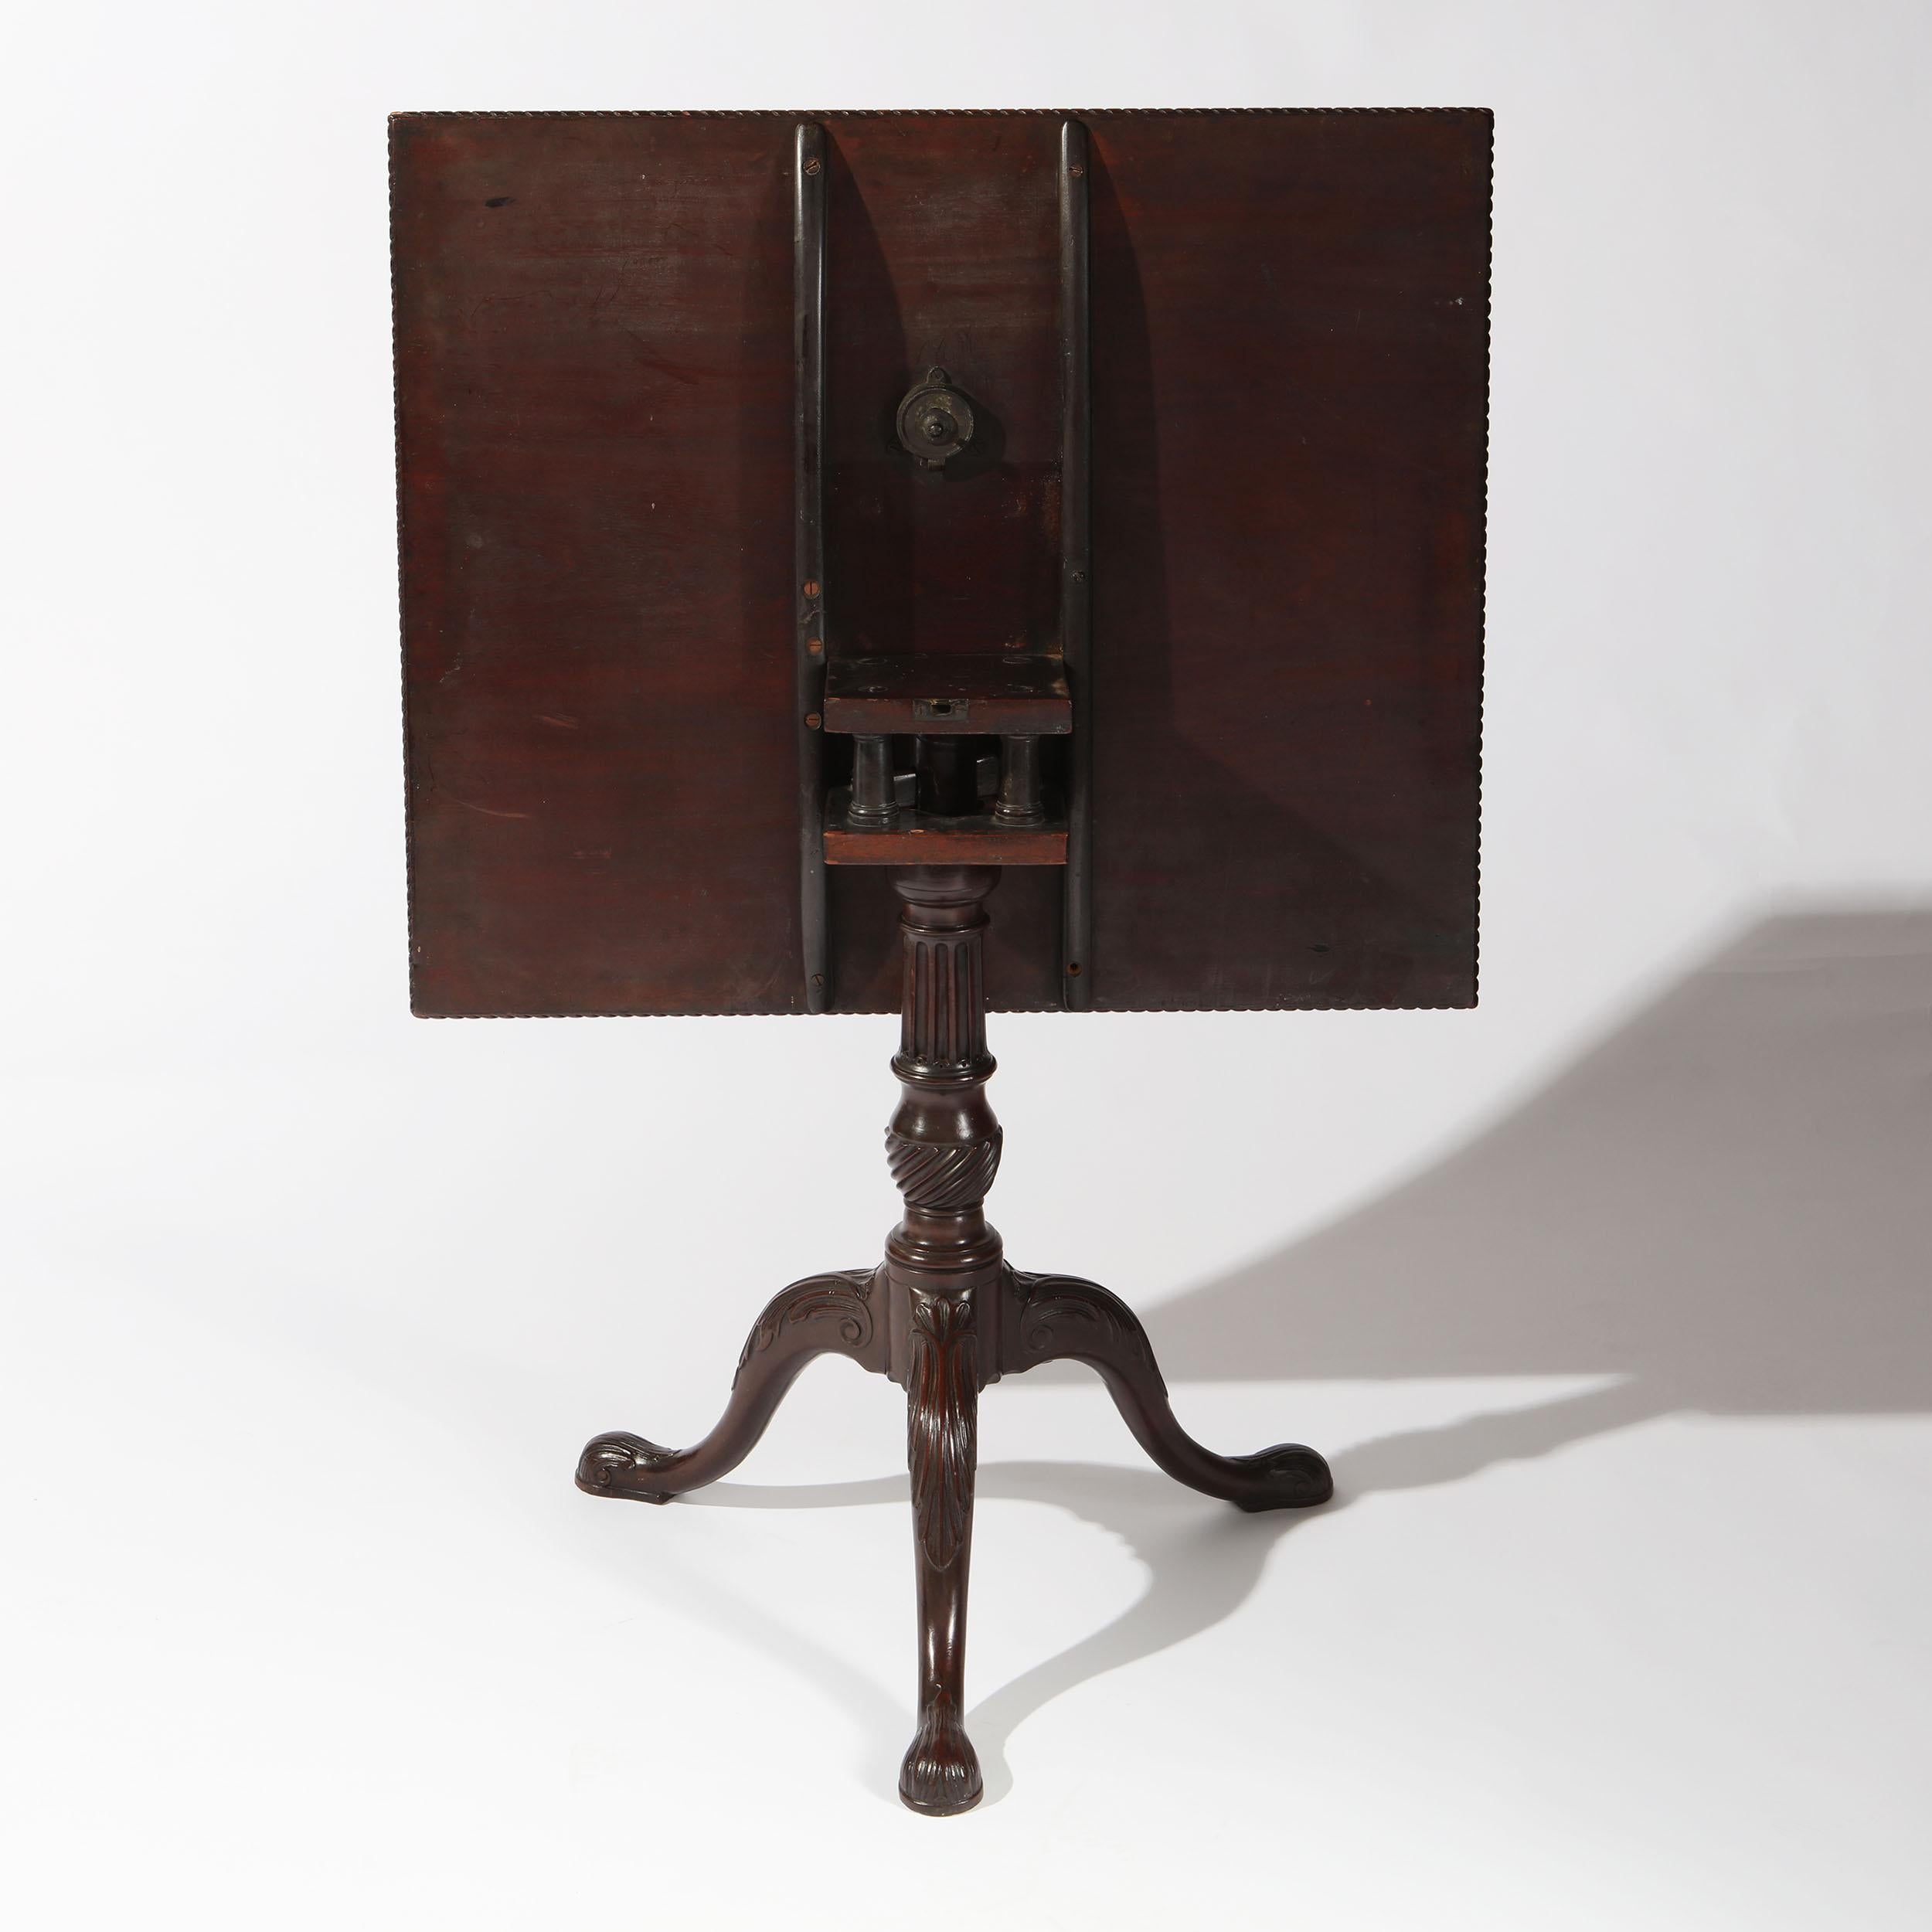 George II Chippendale Mahogany Tripod Table For Sale 4